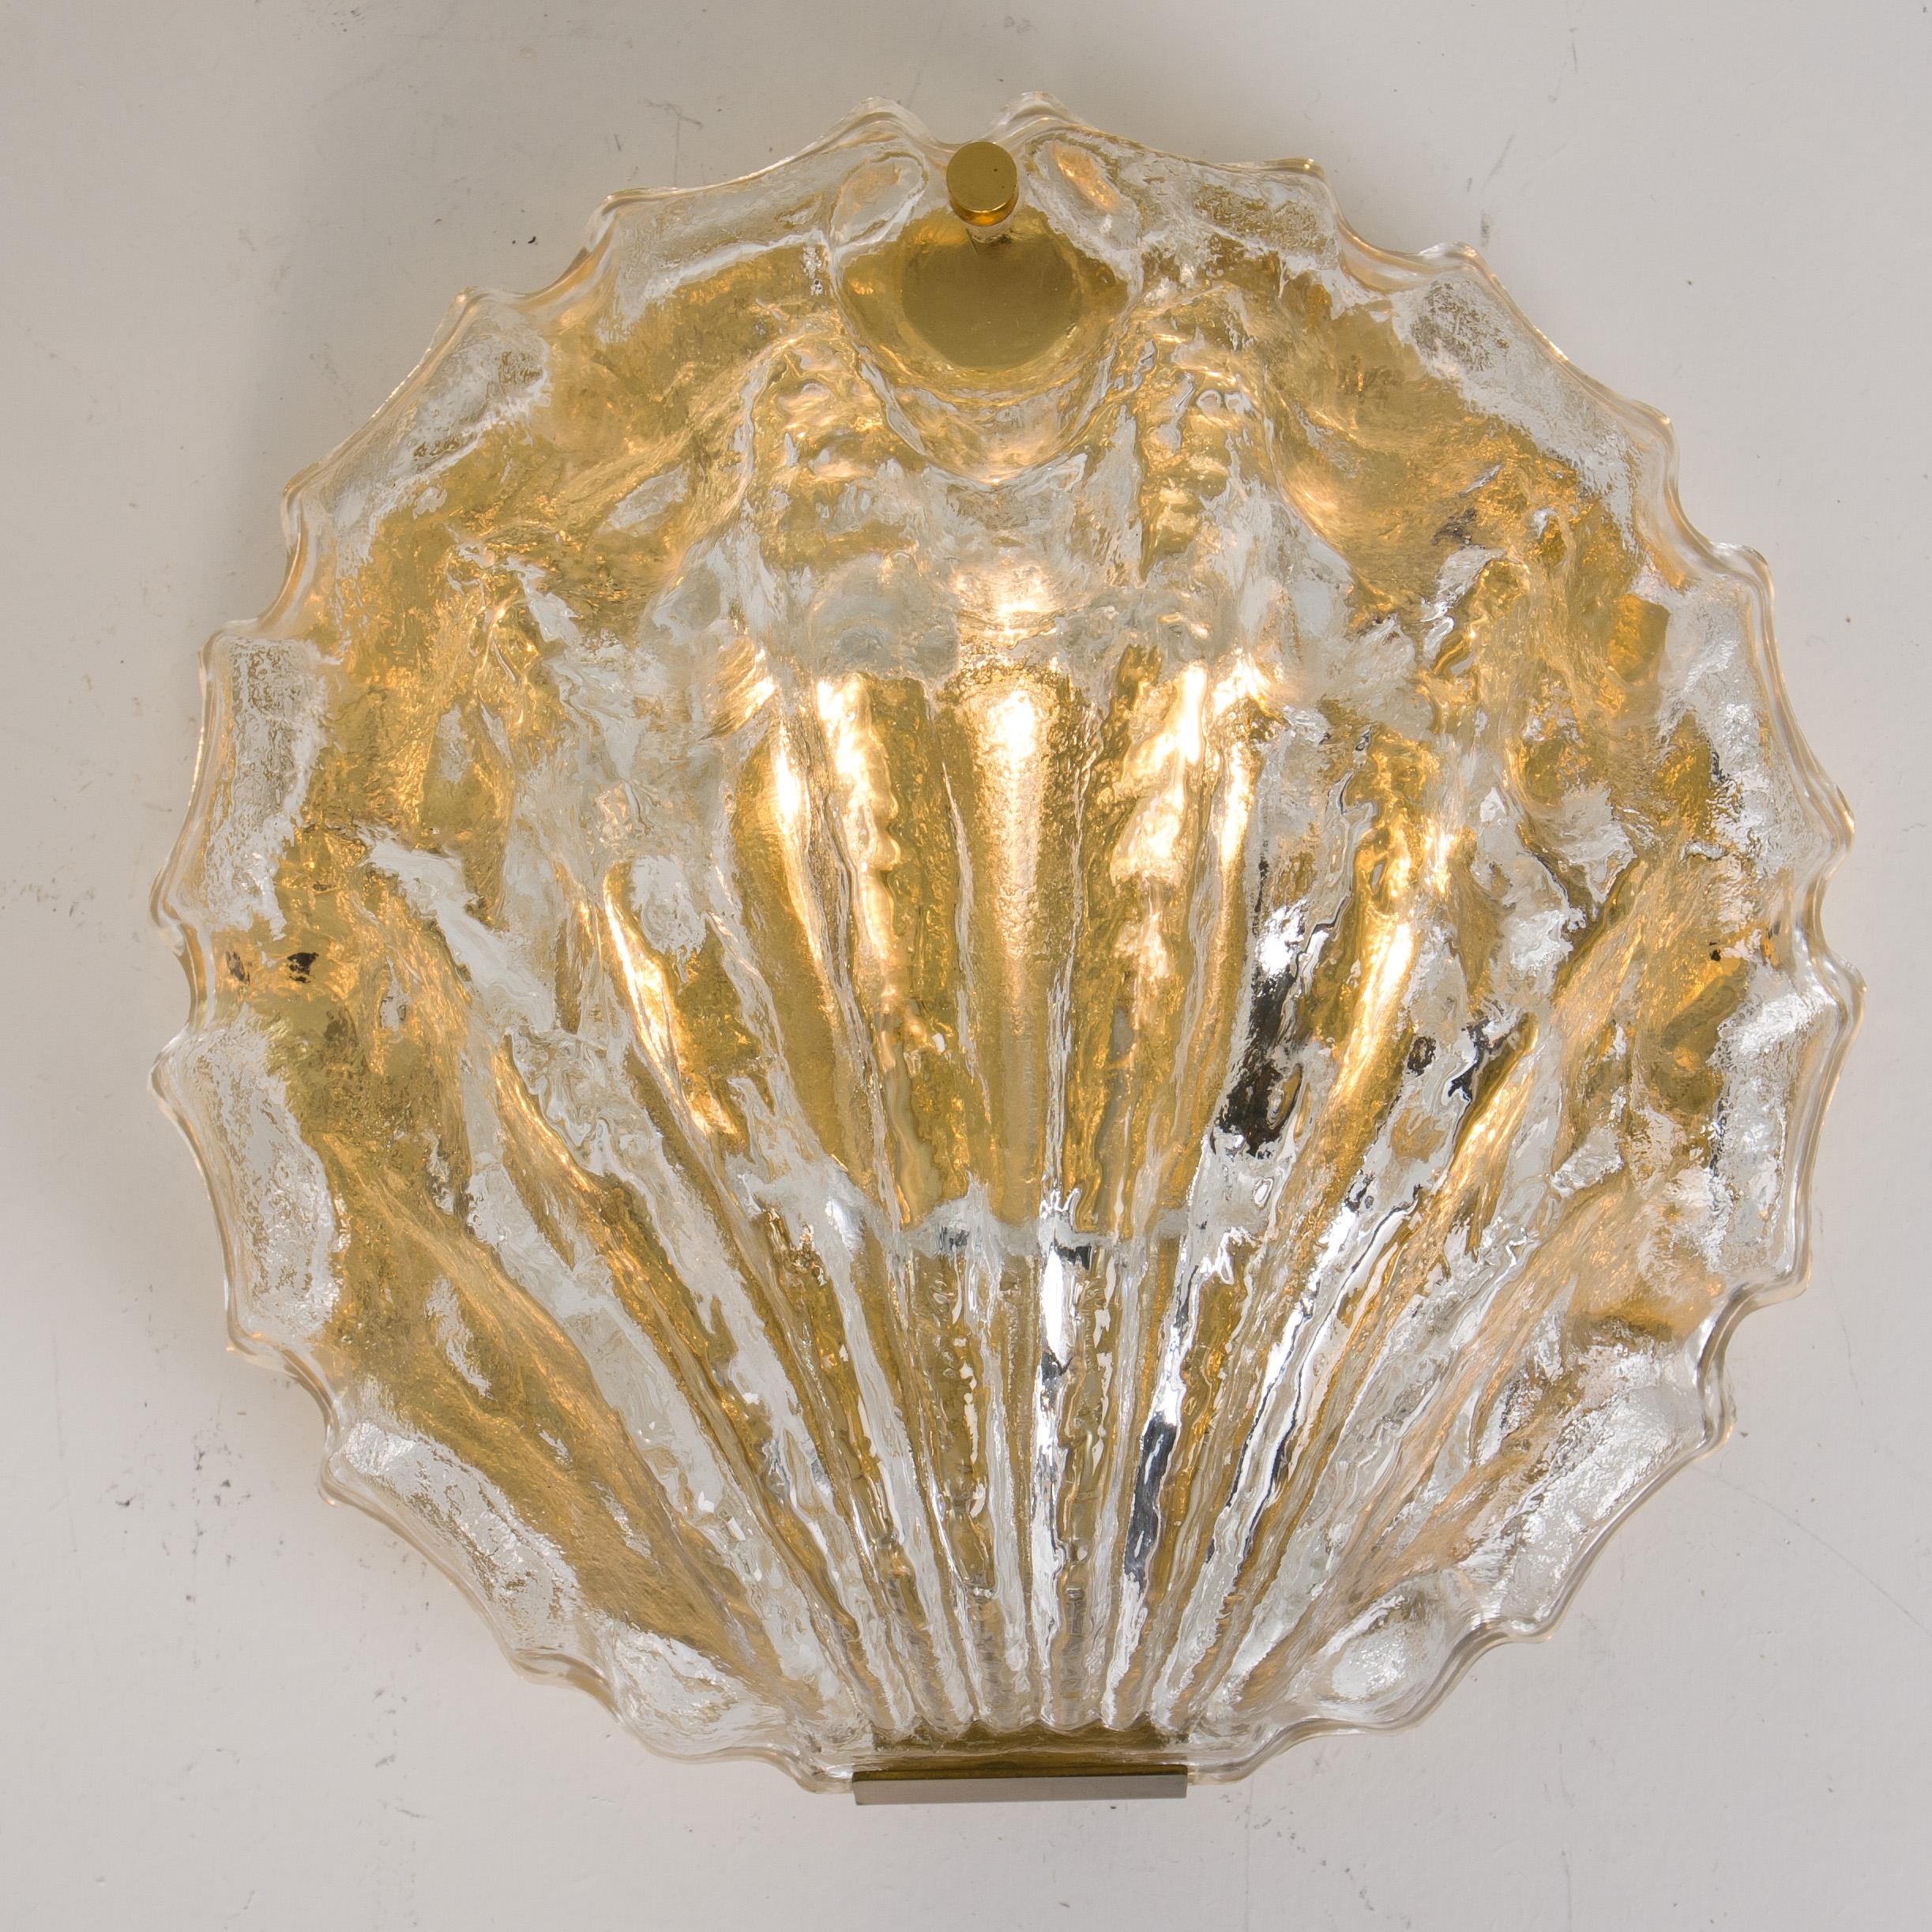 Pair of very exclusive wall lights by J.T. Kalmar handmade and very heavy quality. Each sconce is made of polished brass frames with a large crystal glasses in the form of a shell. Illuminates beautifully.

Please notice the price is for